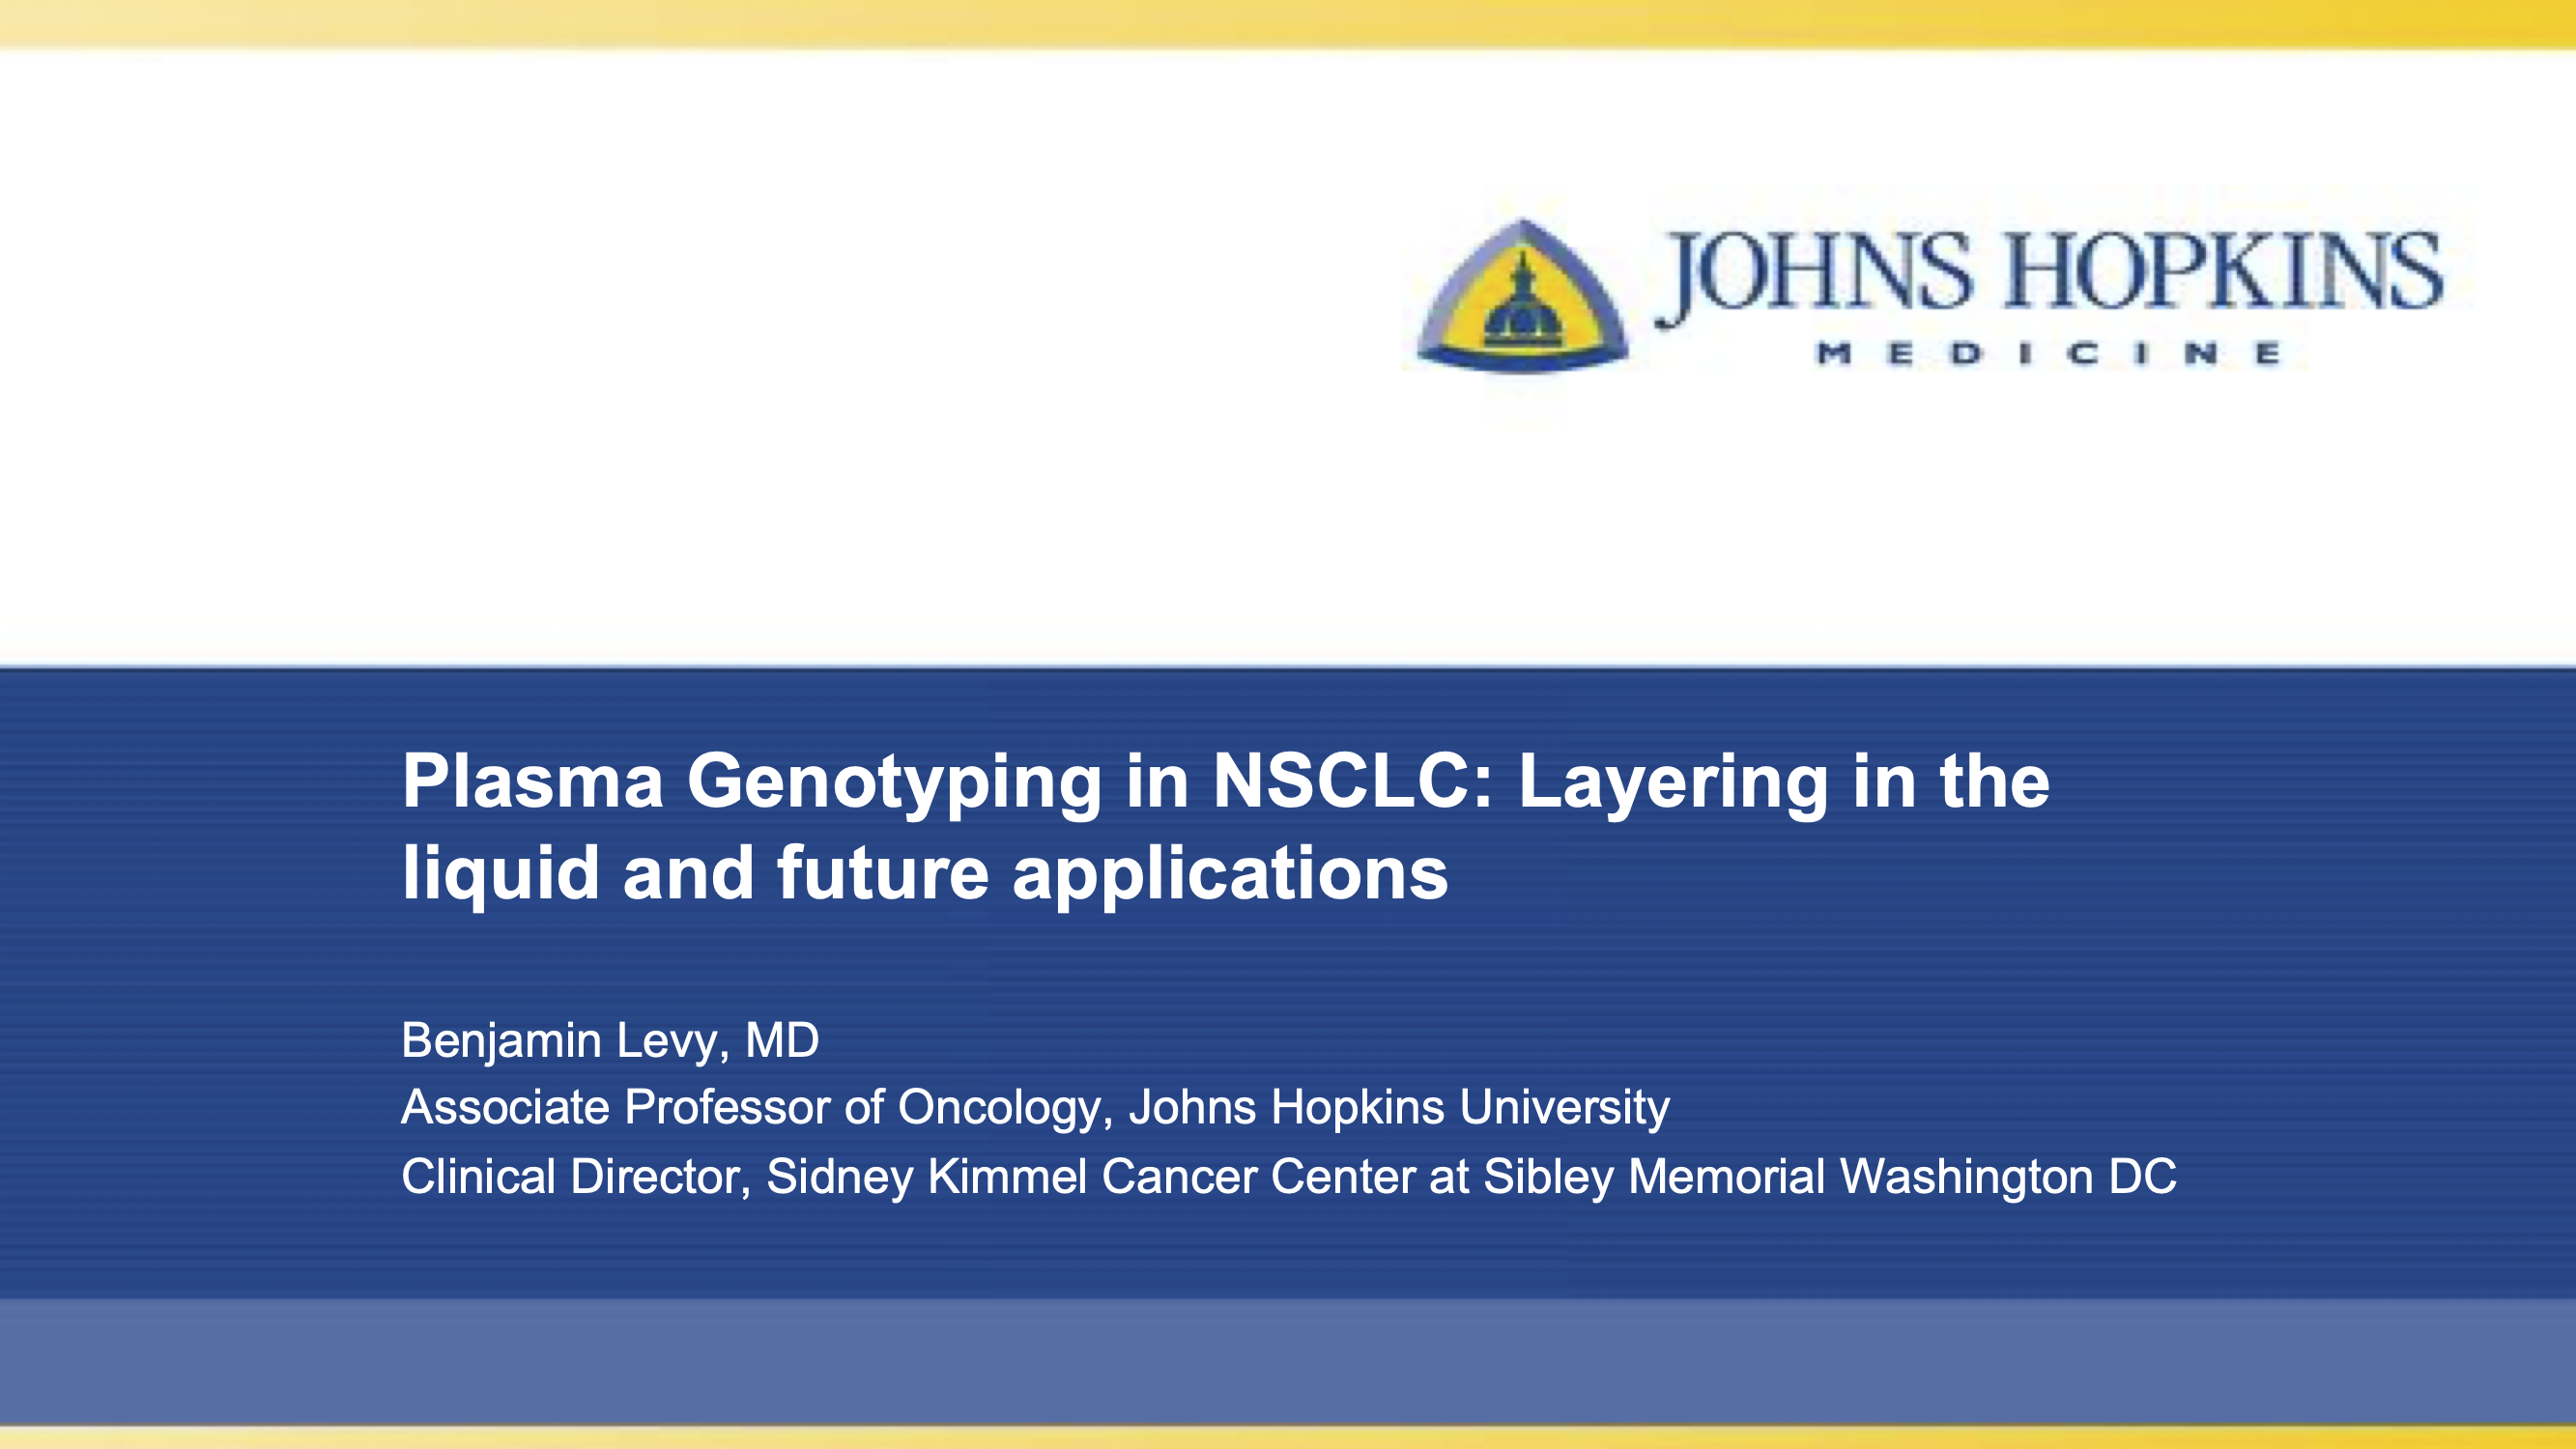 Plasma Genotyping in NSCLC: Layering in the Liquid and Future Applications